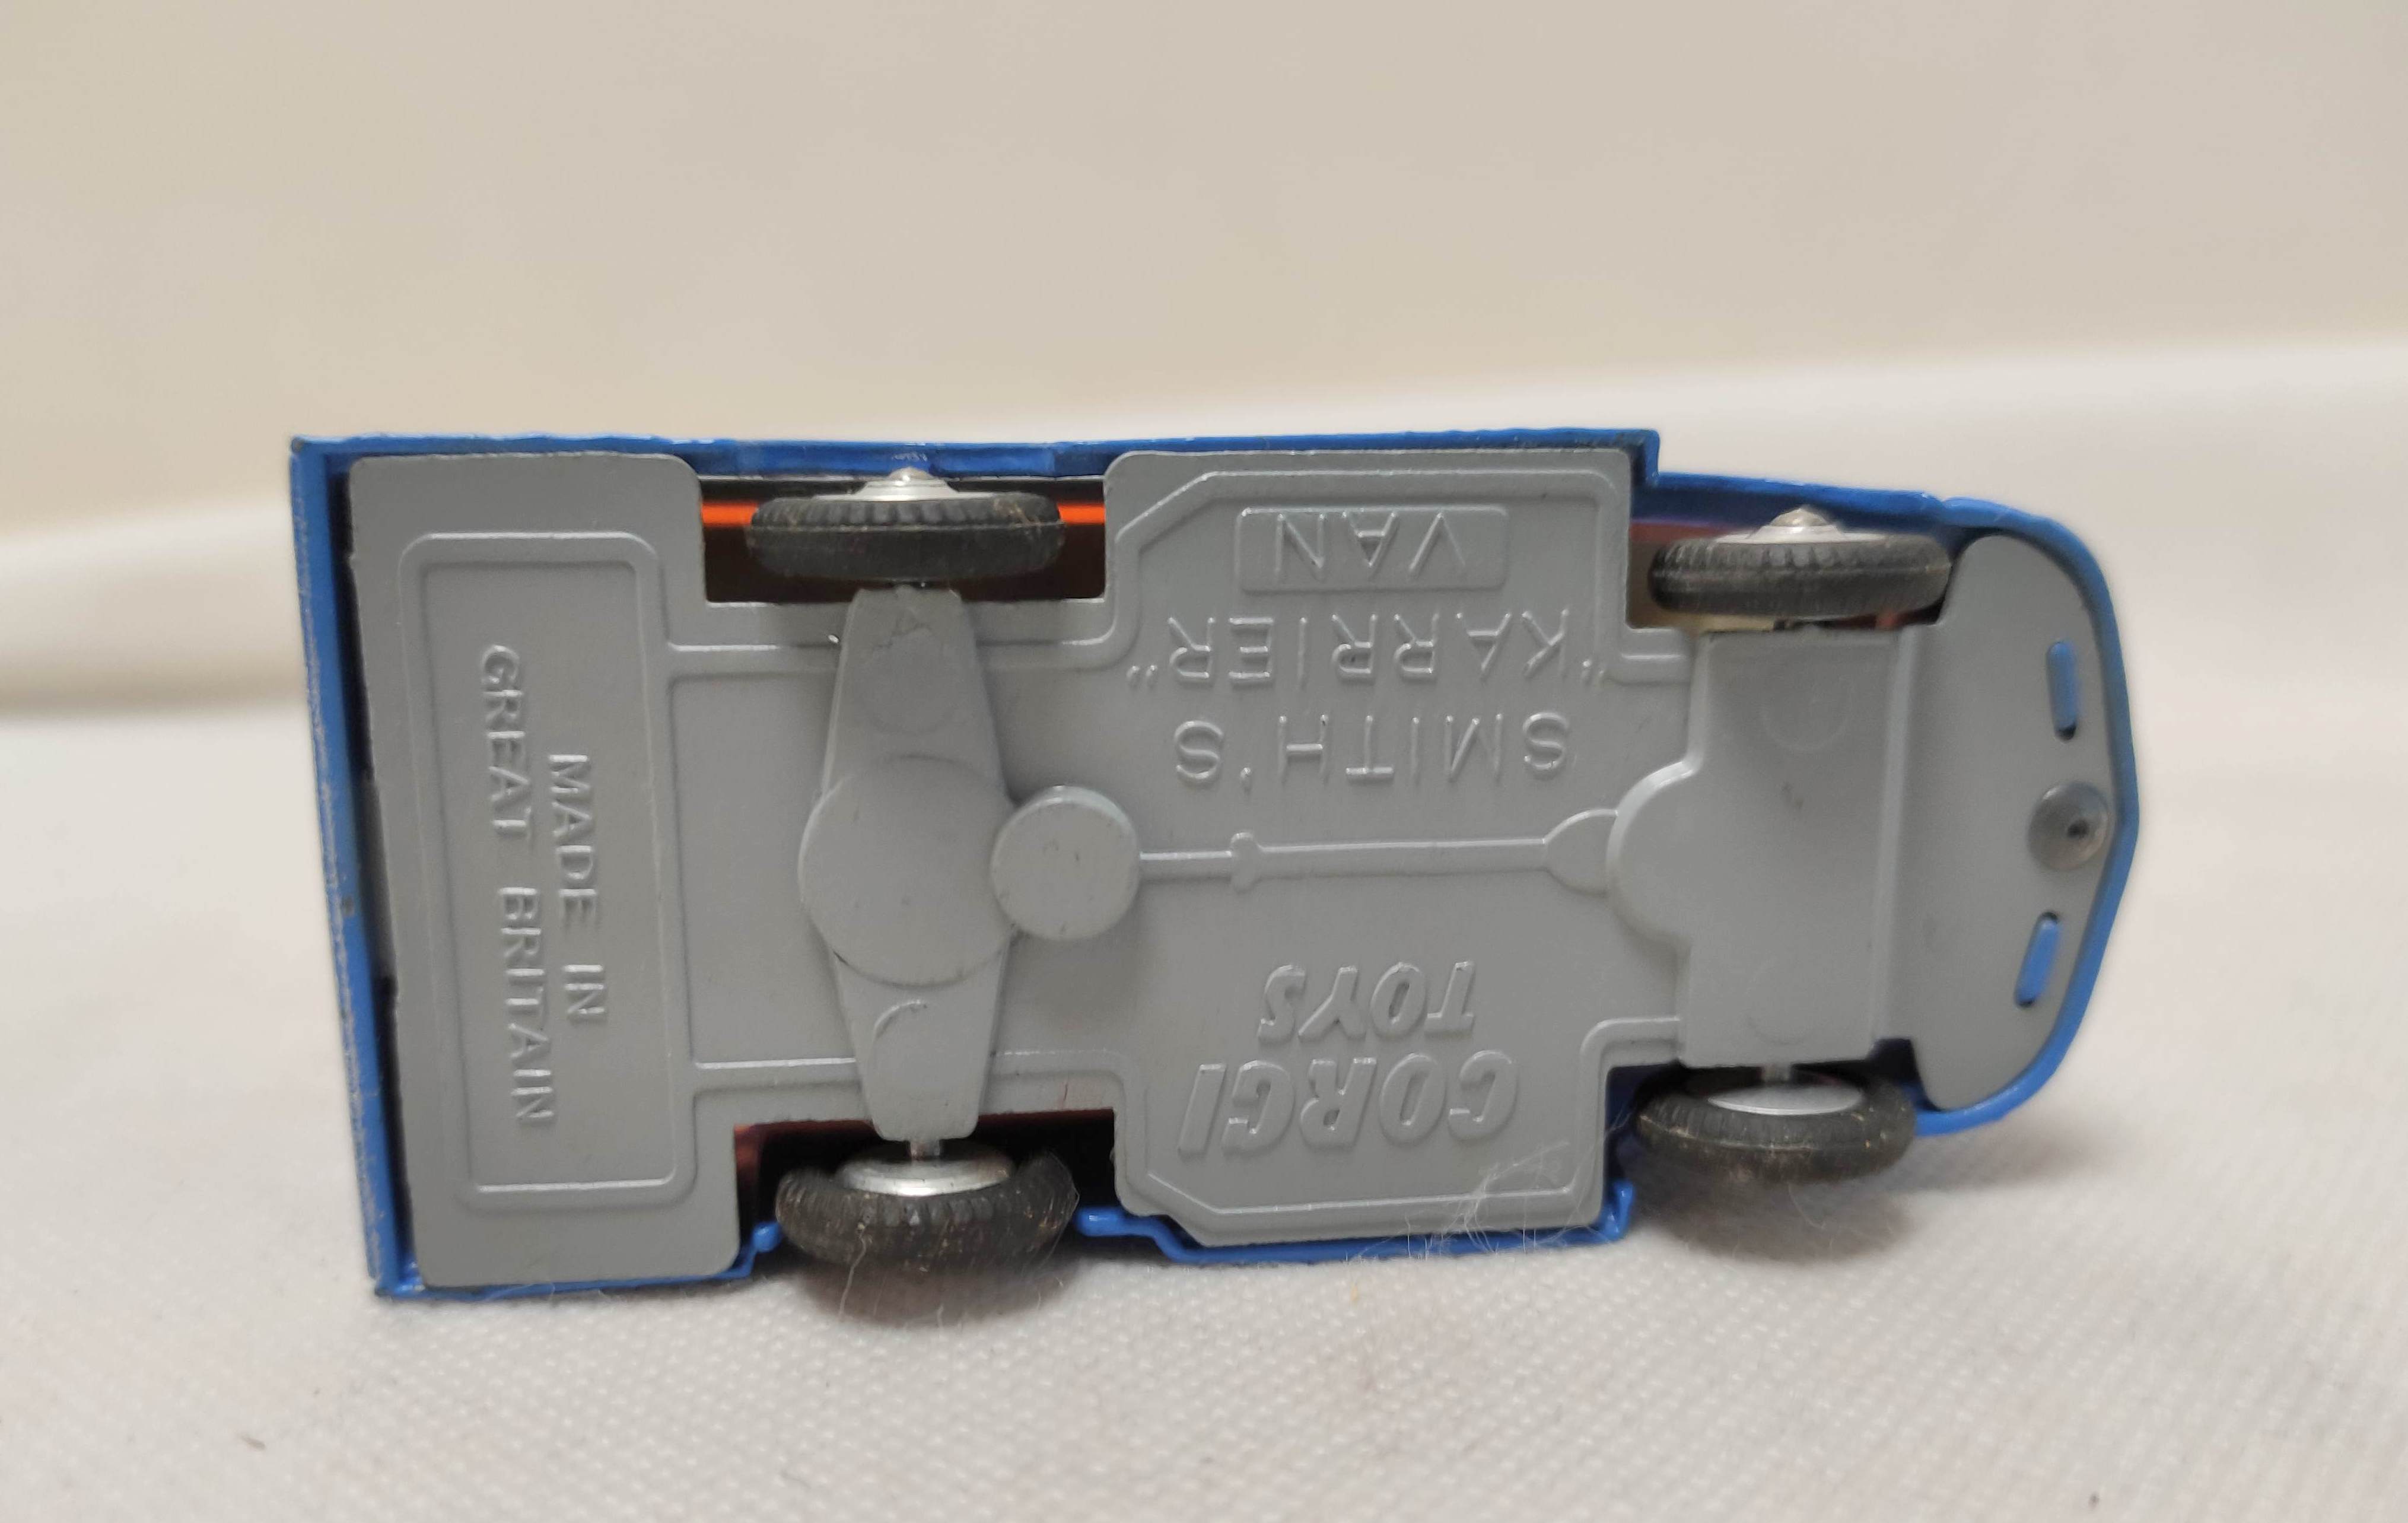 Corgi Toys model 471 Smith's-Karrier mobile canteen "Joe's Diner" blue painted die cast vehicle with - Image 6 of 8